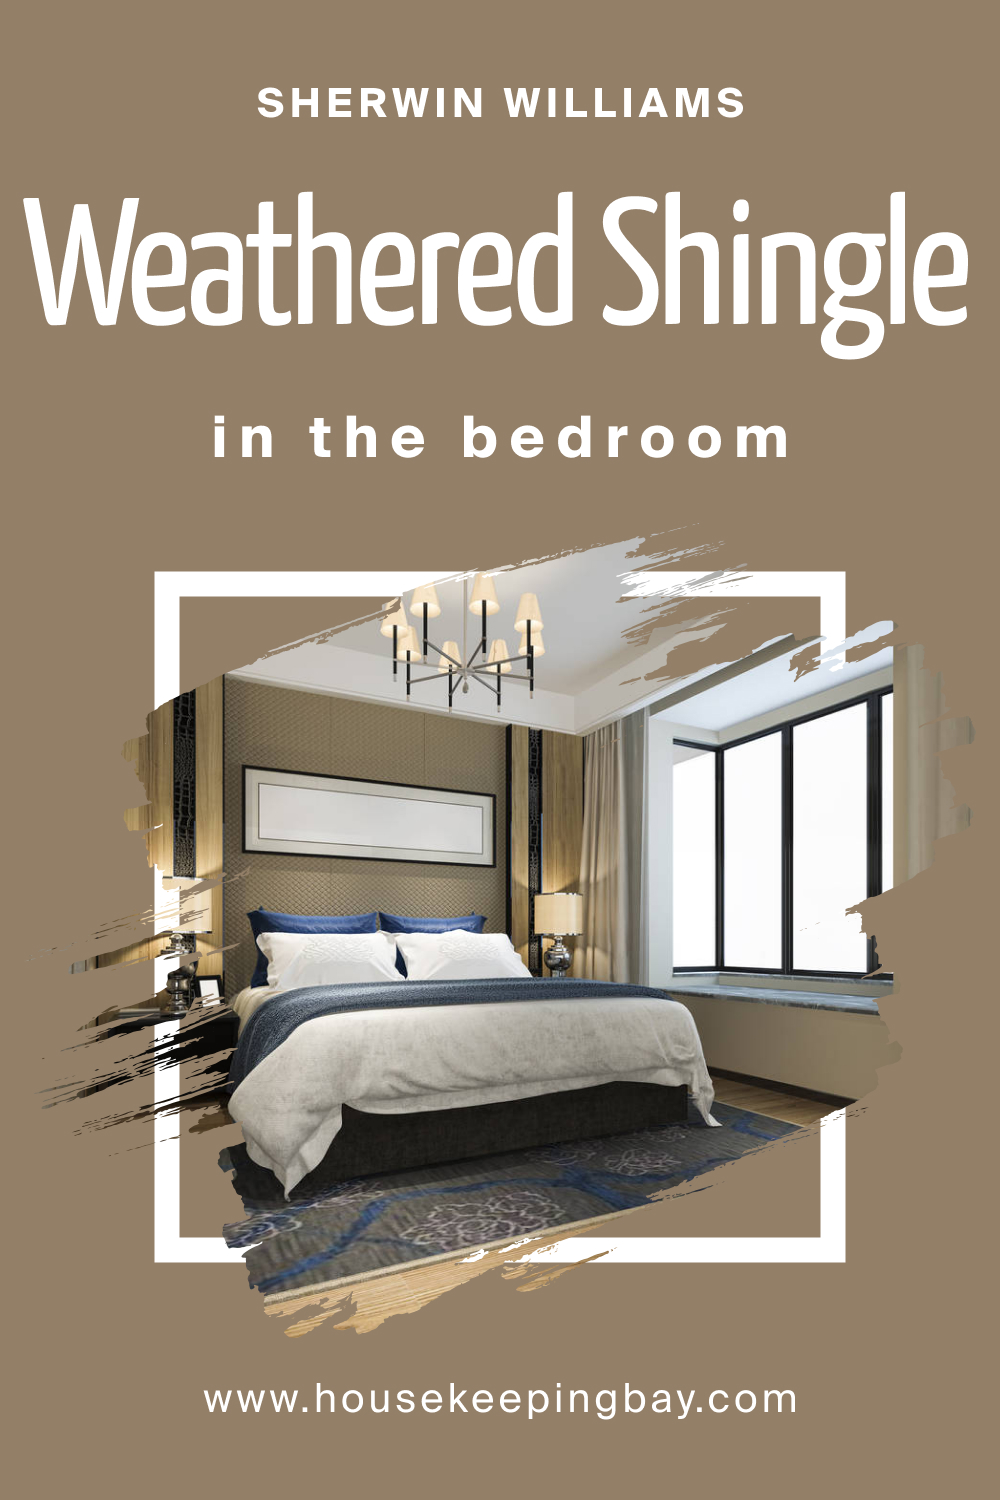 Sherwin Williams. SW 2841 Weathered Shingle For the bedroom